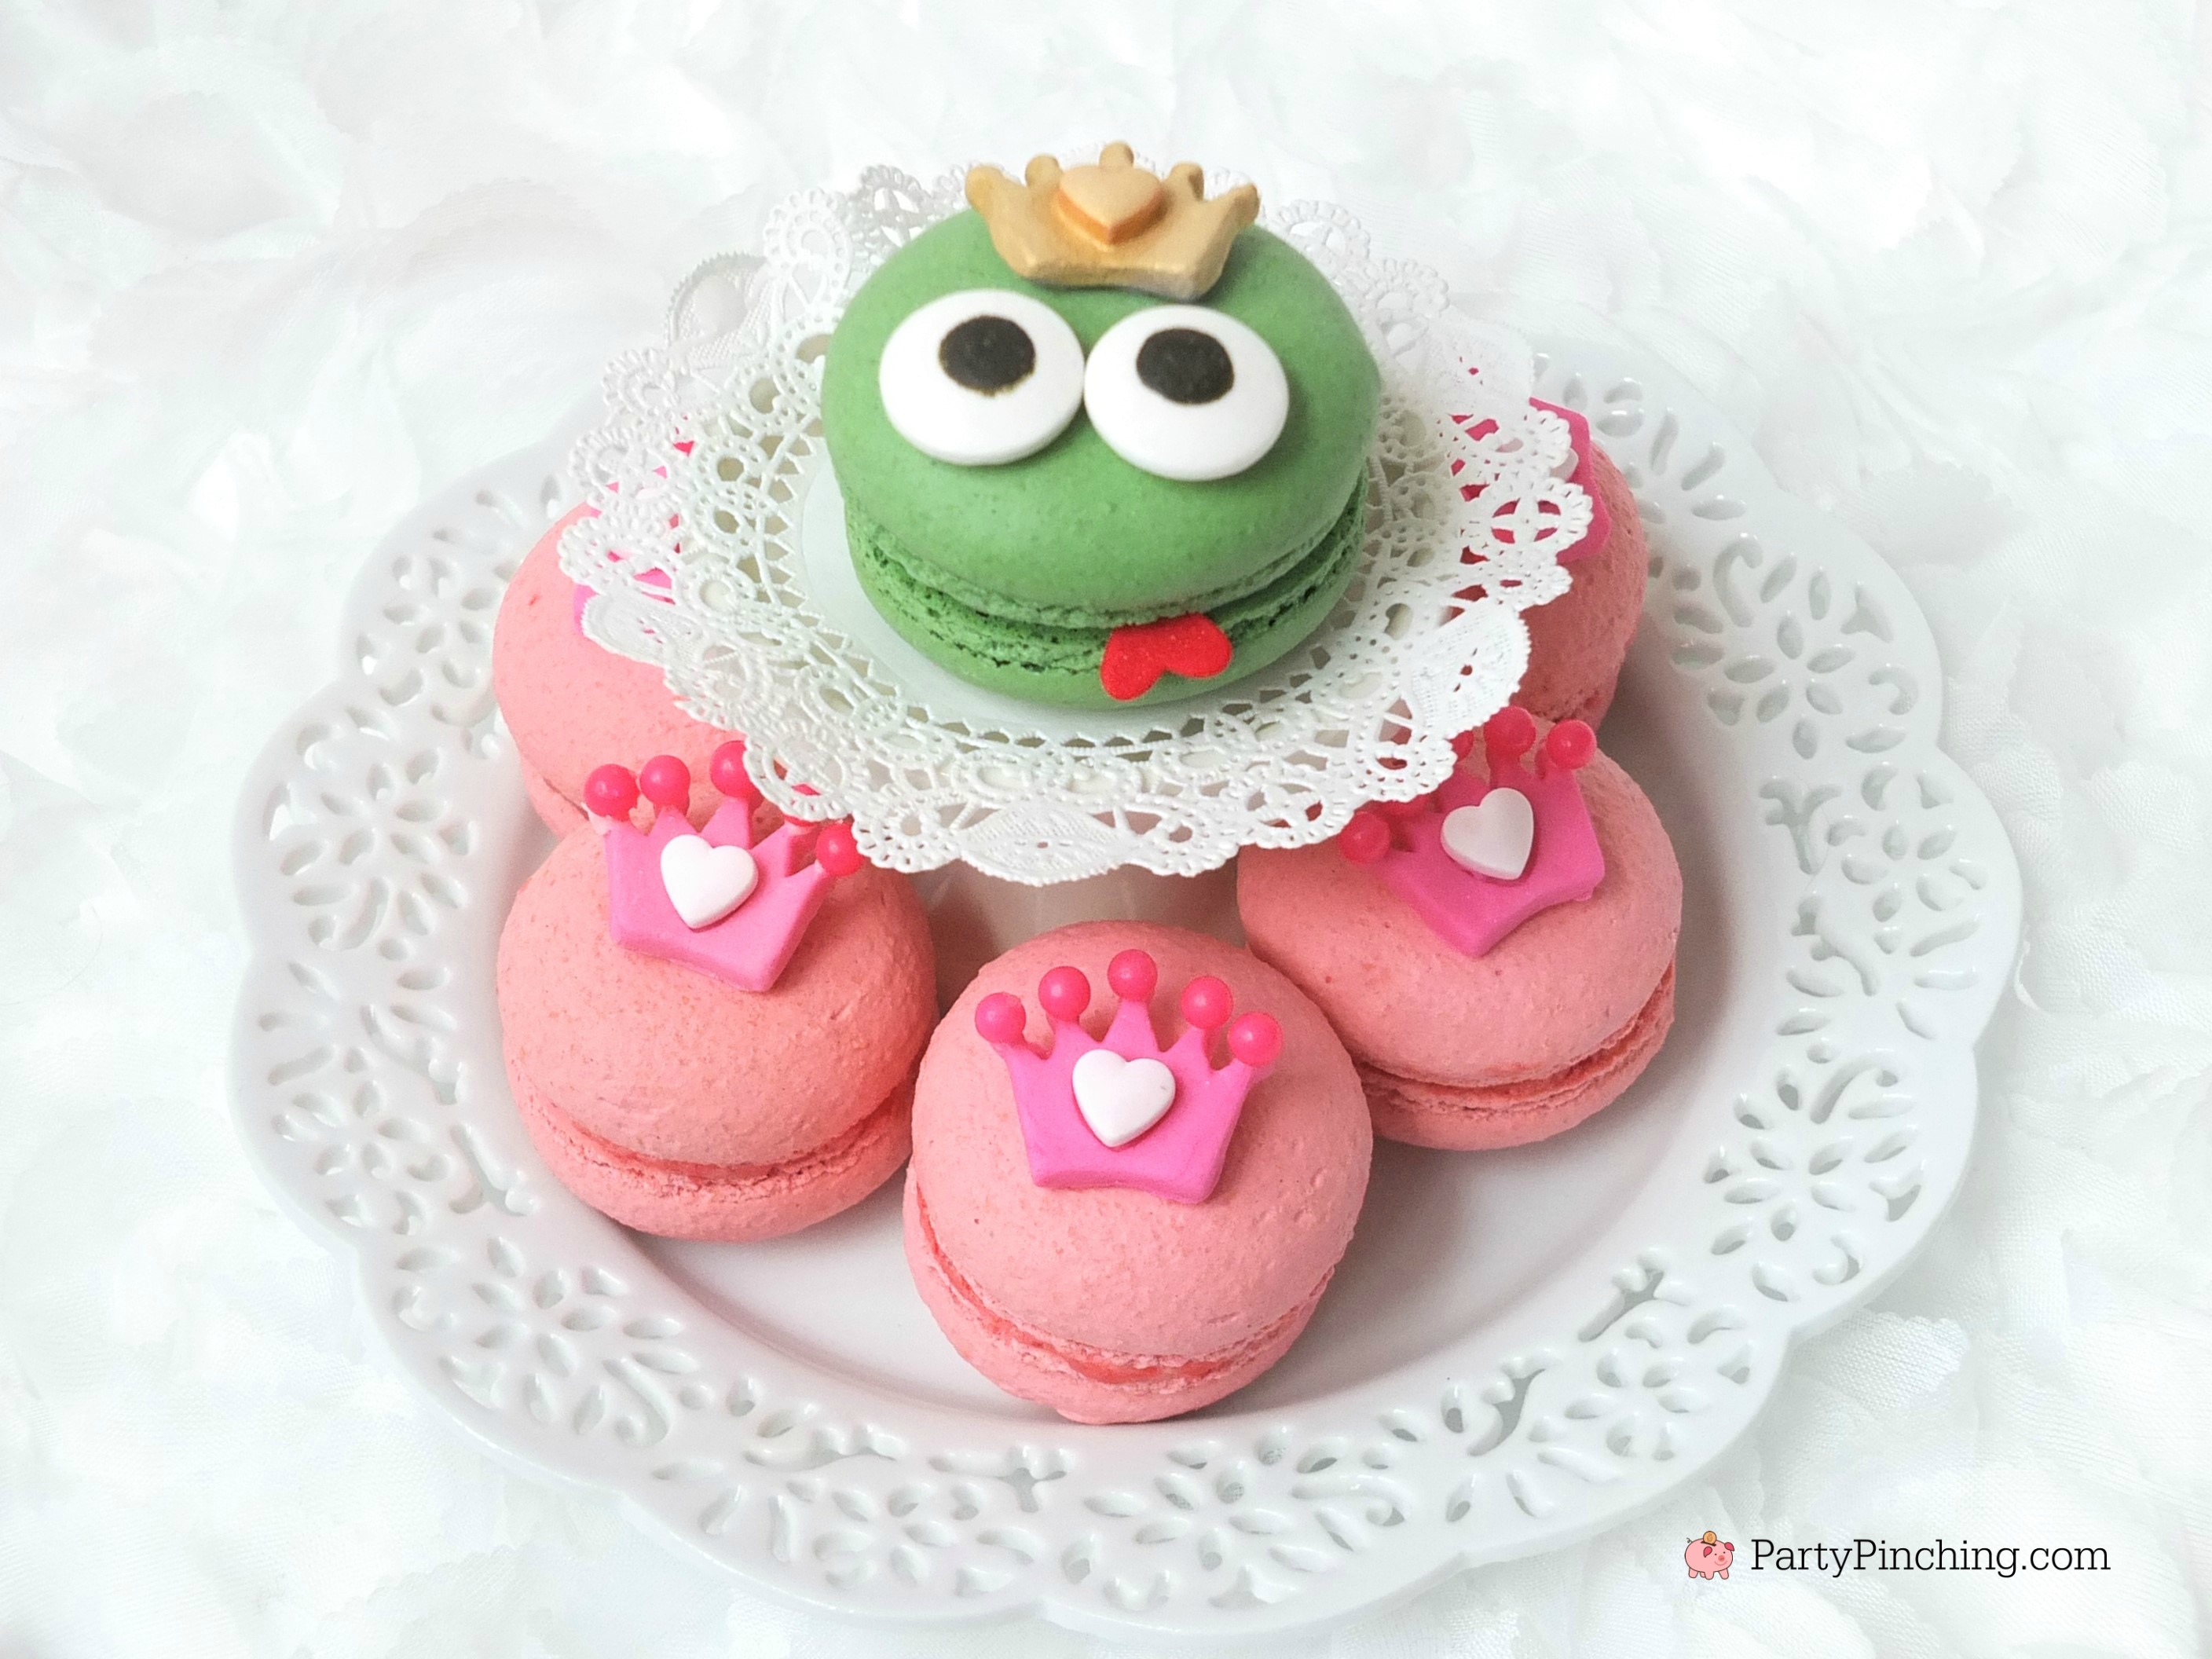 princess and frog macarons, cute macarons, princess party food ideas, cute desserts for pink girl party, princess party ideas, adorable dessert ideas, sweet treats, cute food, fun food for kids, cute decorated cookies